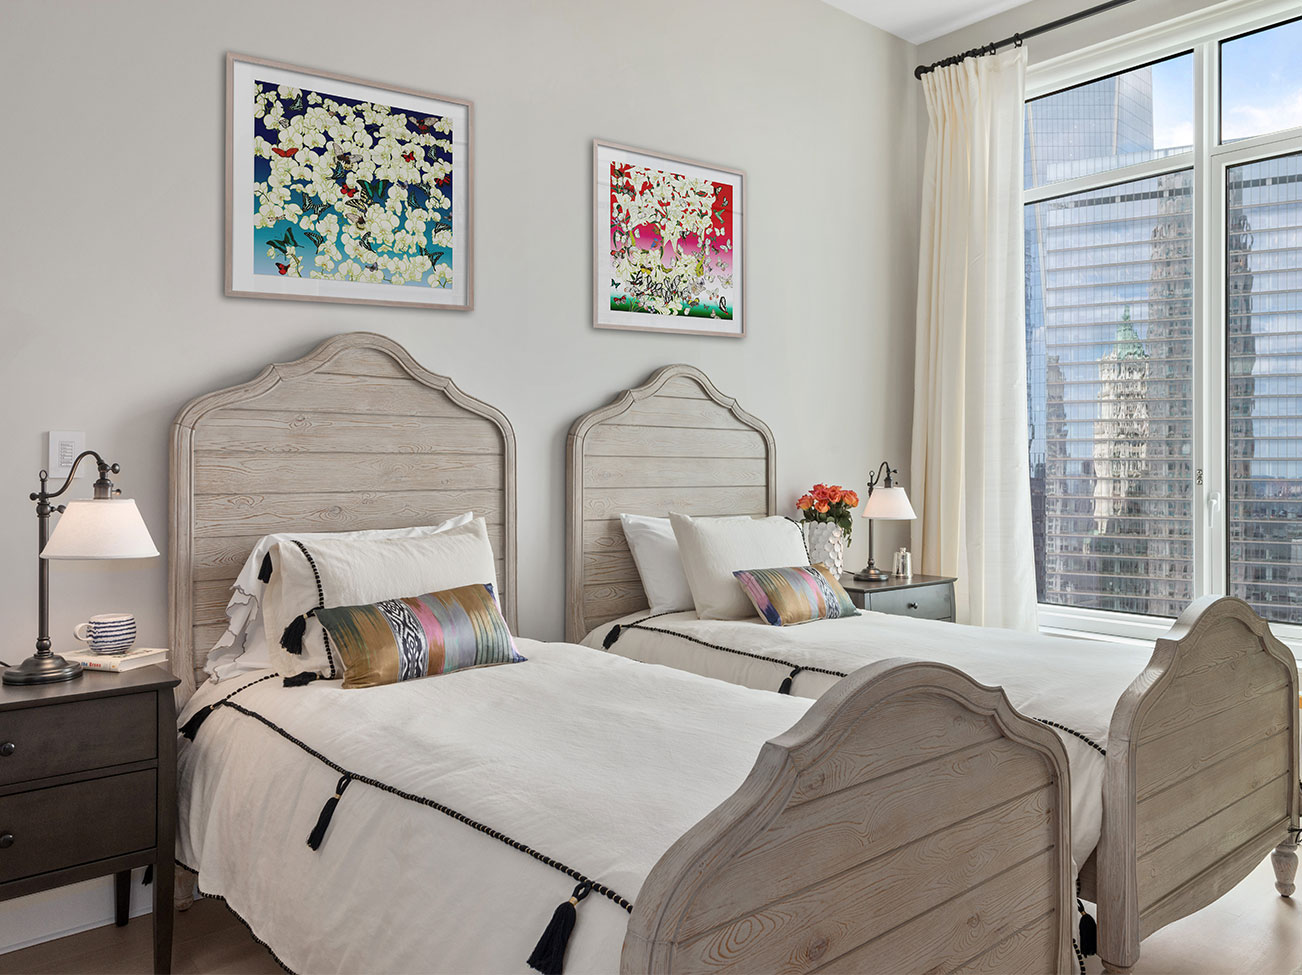 Bedroom with twin beds, artwork over headboards, pale gray walls, city view through sheer shades and white curtains.